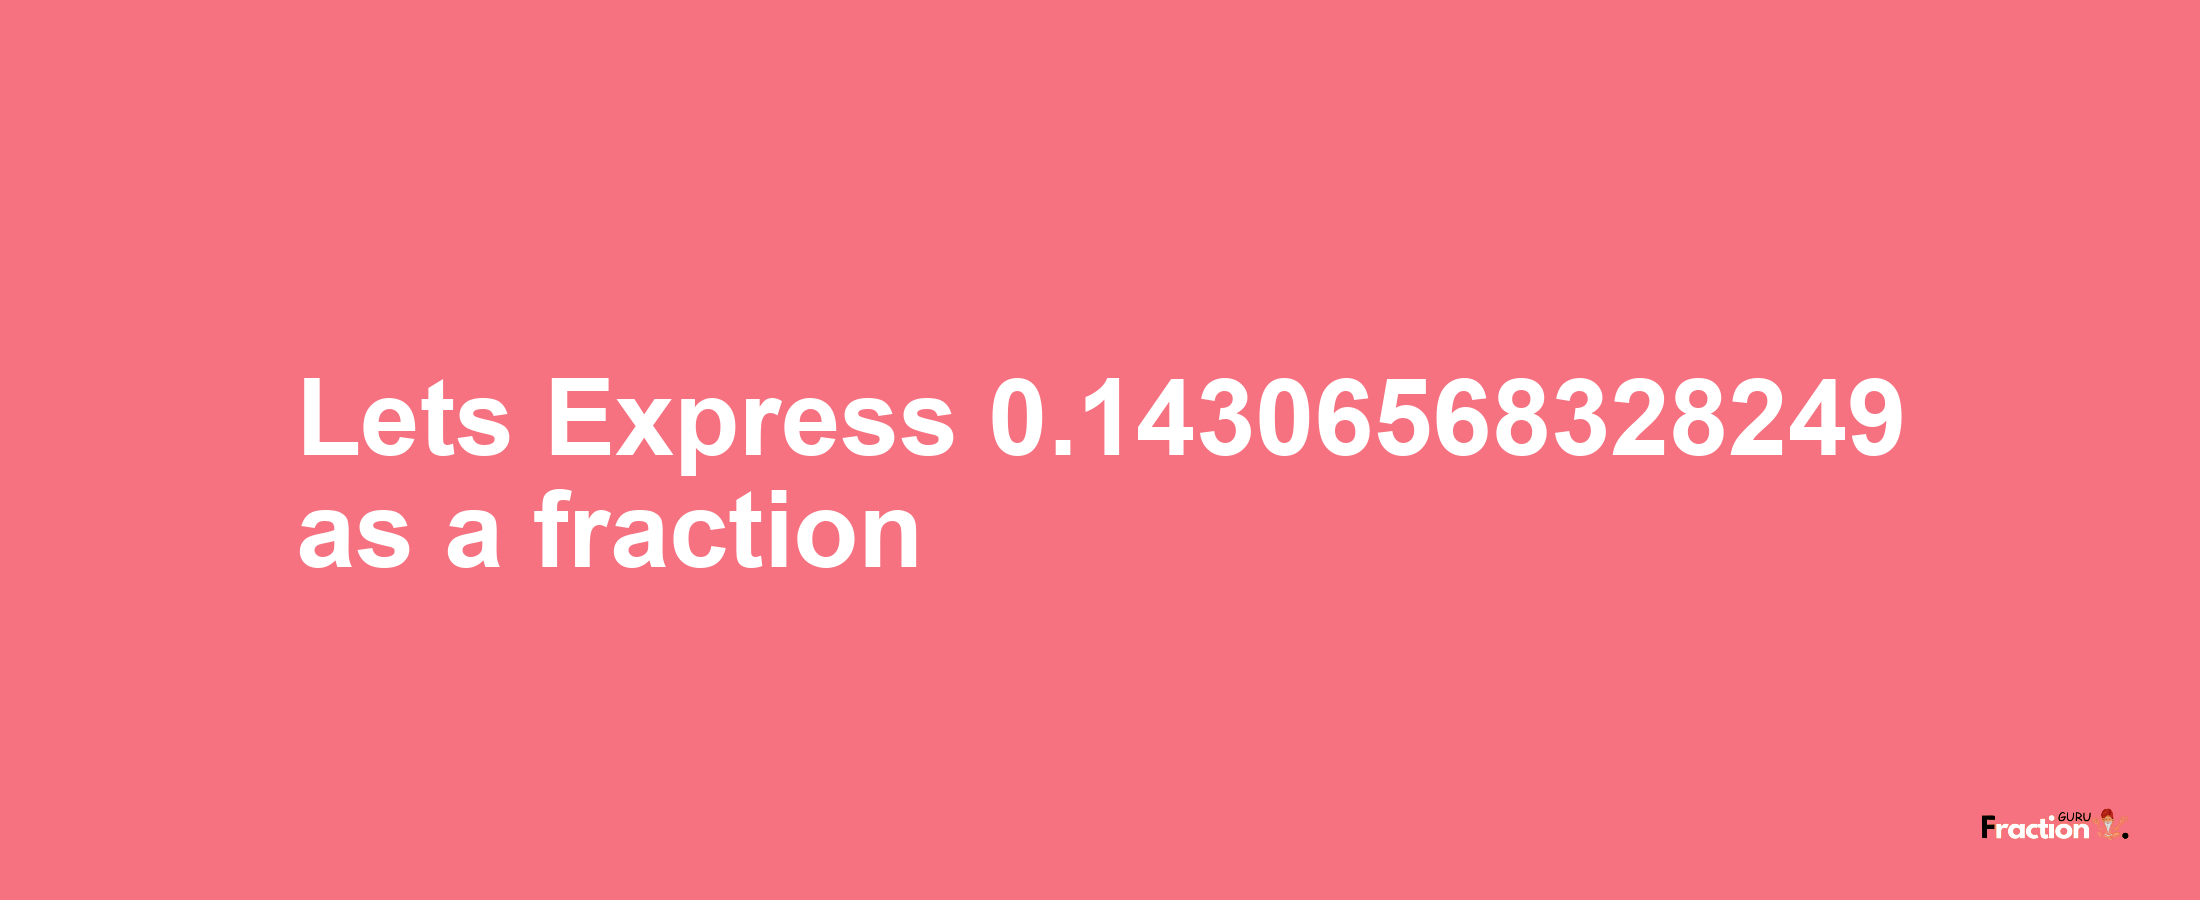 Lets Express 0.14306568328249 as afraction